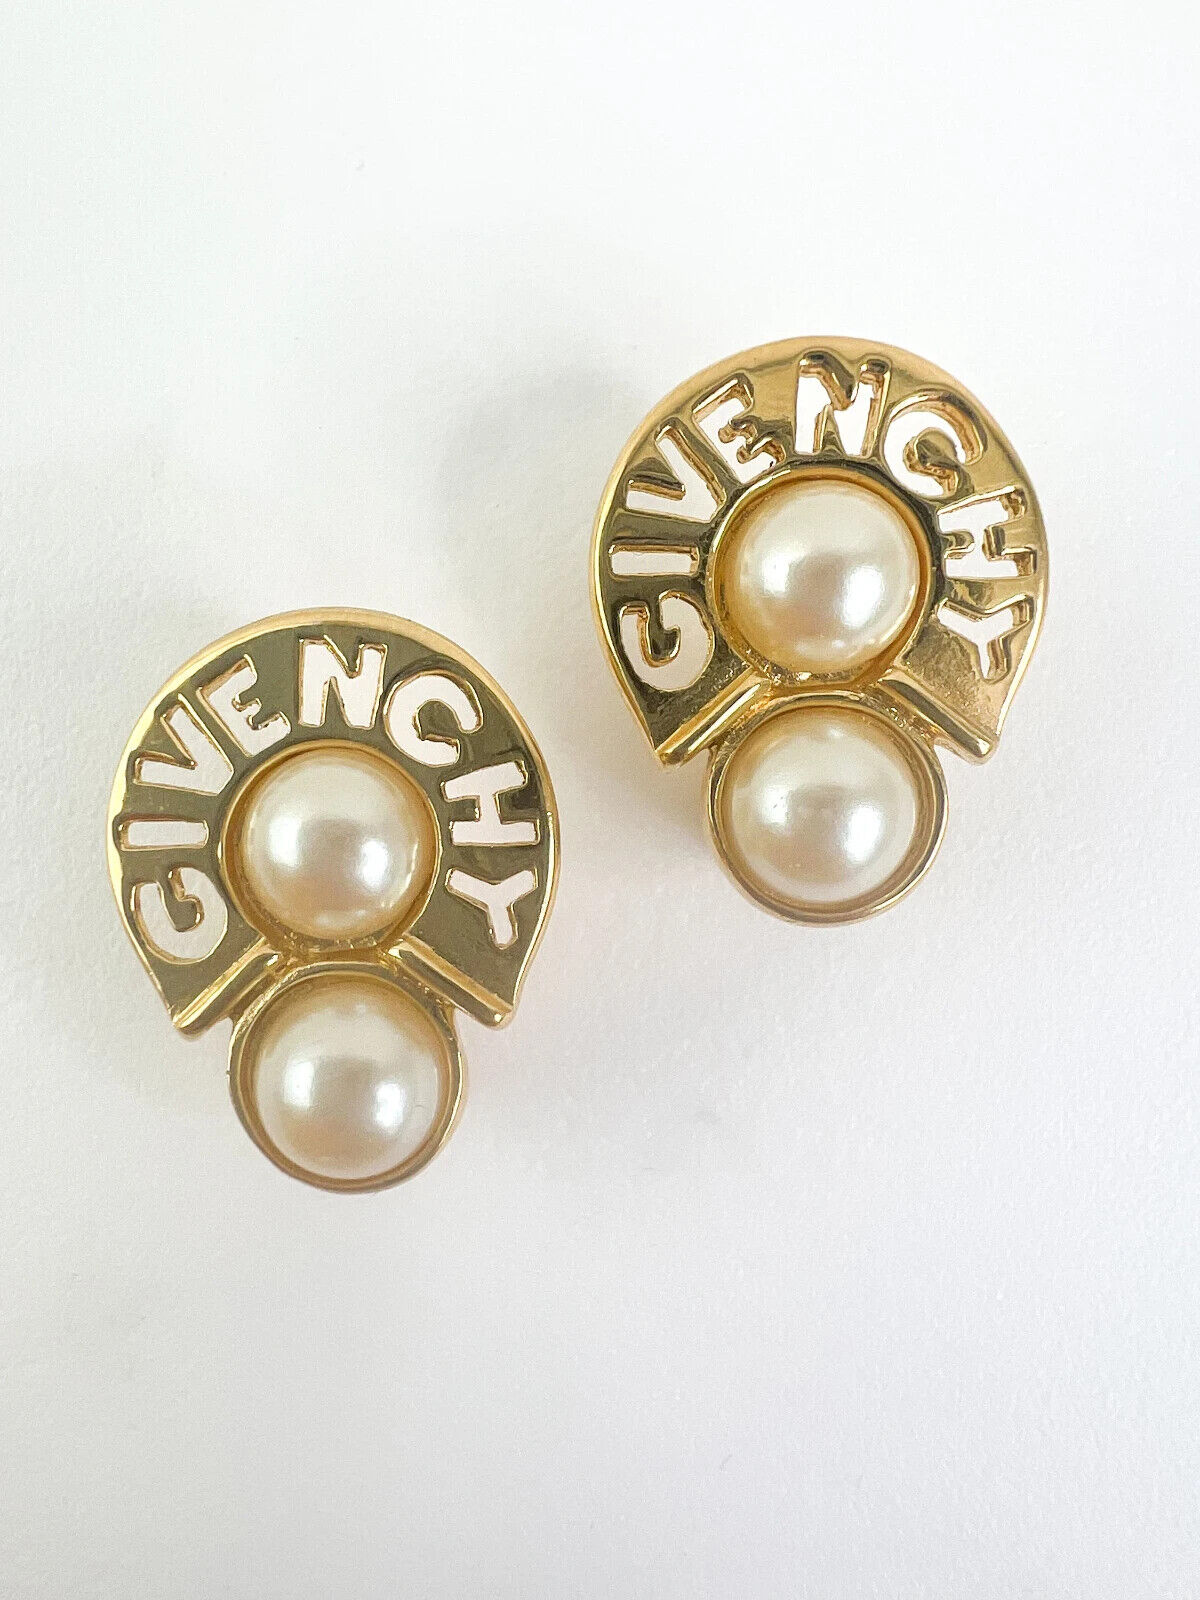 Vintage Givenchy earrings, Givenchy Logo earrings, Givenchy Pearl Earrings, Gift for her, Givenchy 80’s, Jewelry for Women, Bridal Jewelry